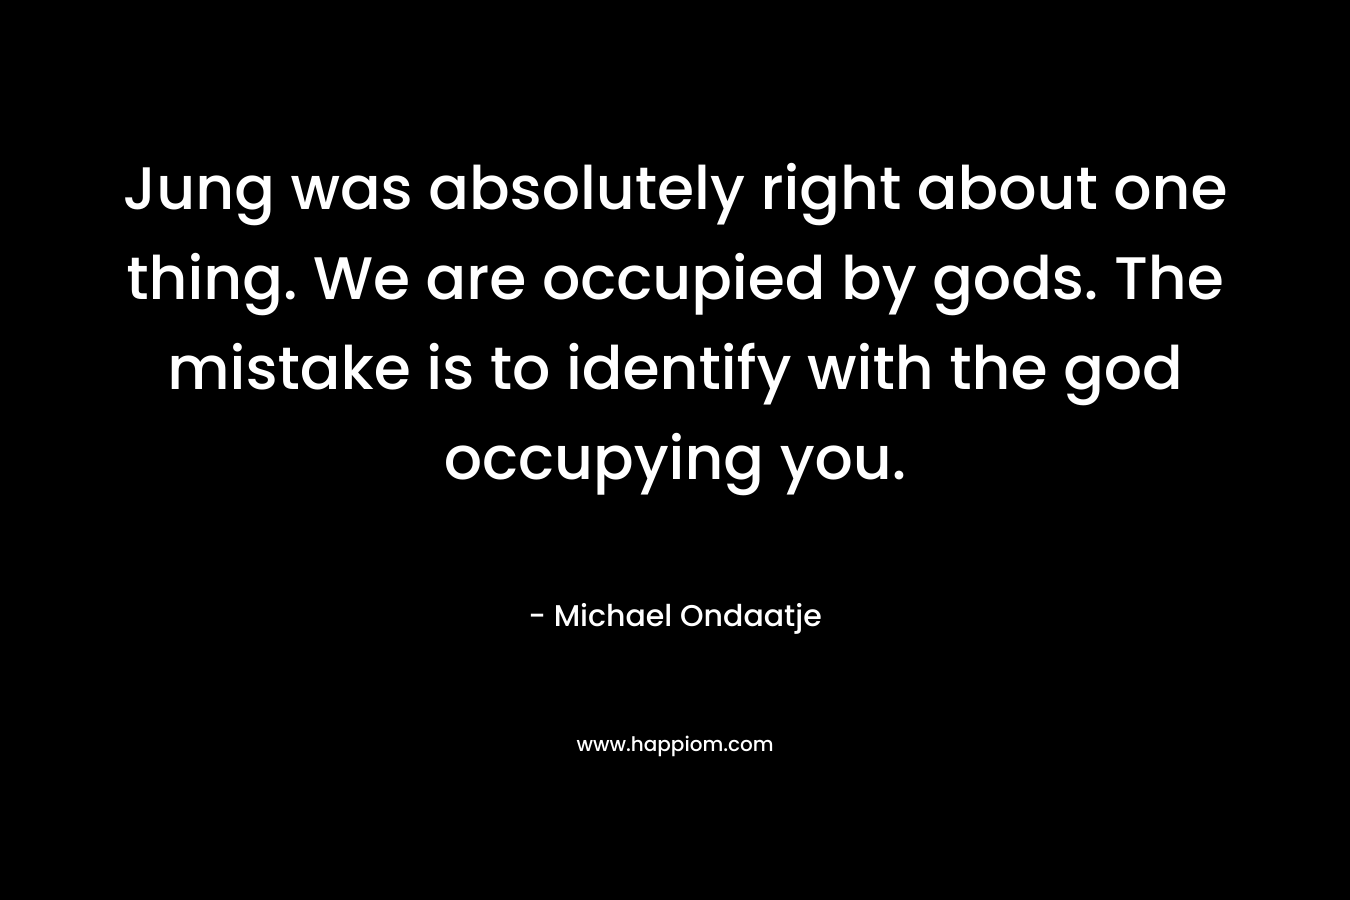 Jung was absolutely right about one thing. We are occupied by gods. The mistake is to identify with the god occupying you.